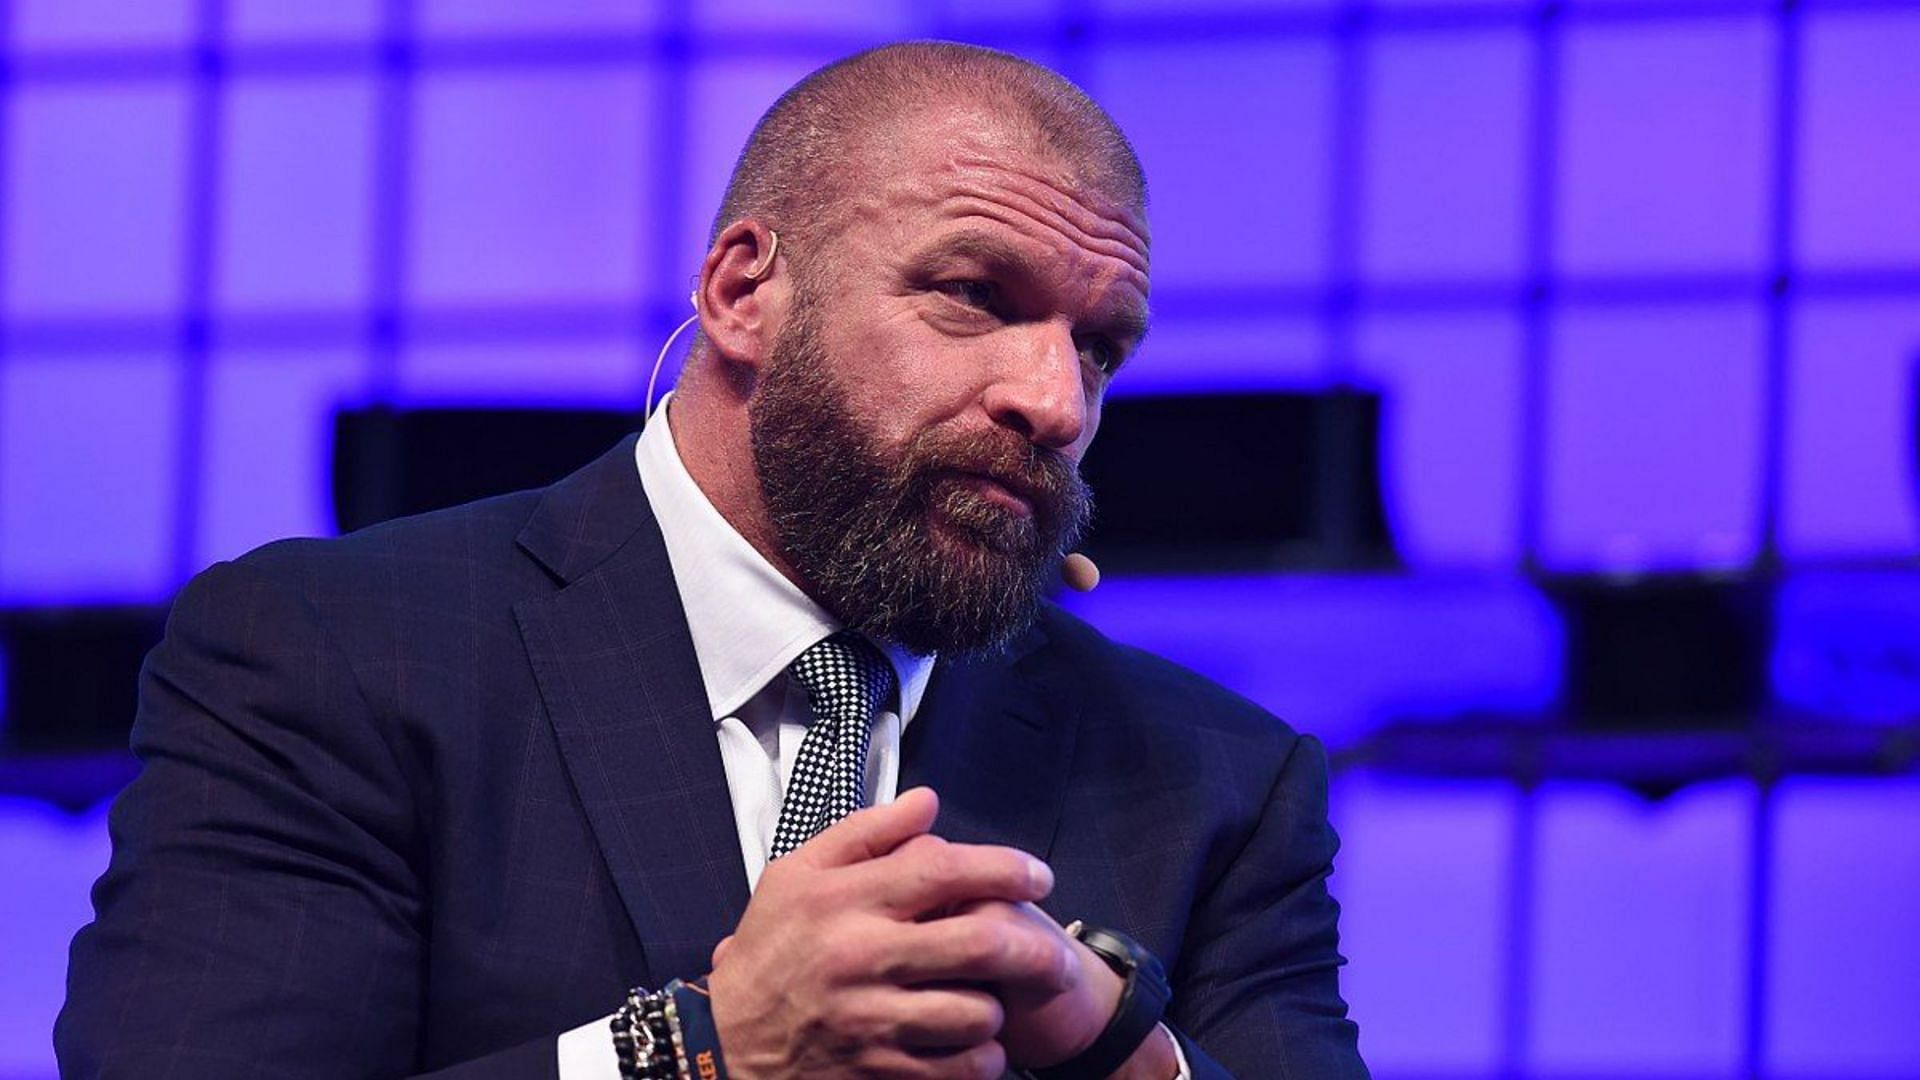 Triple H has brought back several former superstars to WWE